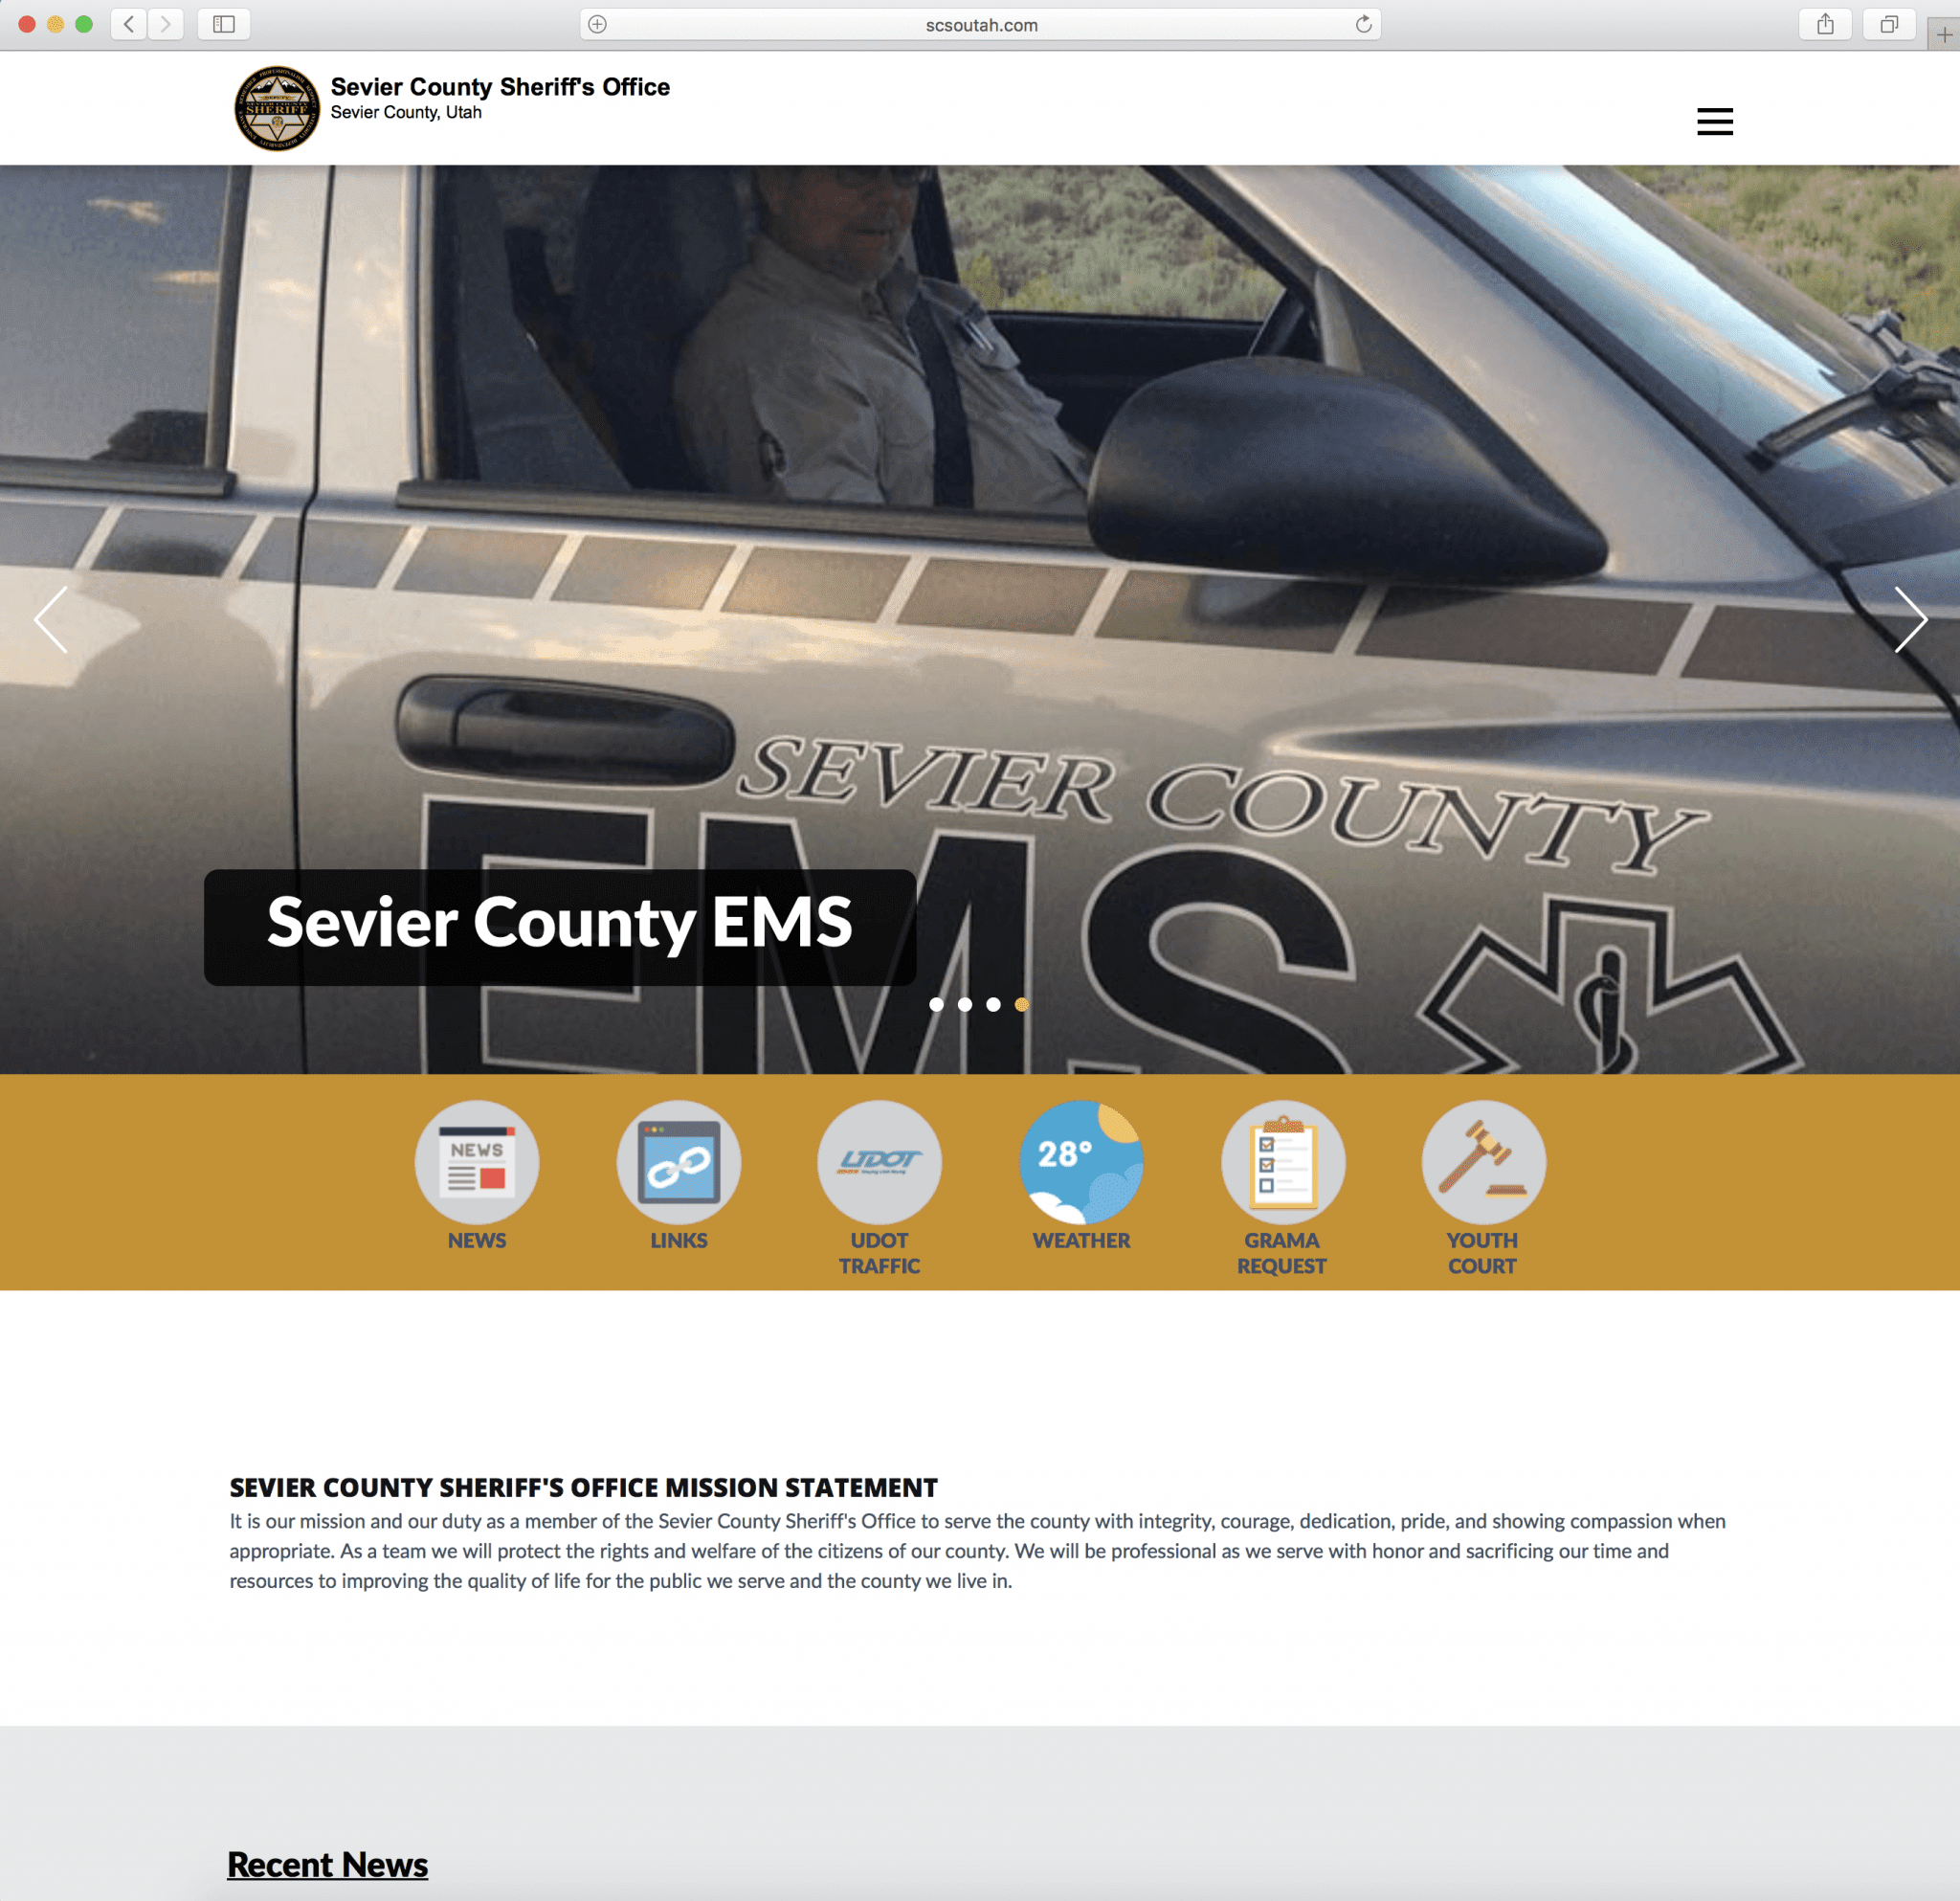 Sevier County Sheriff's Office